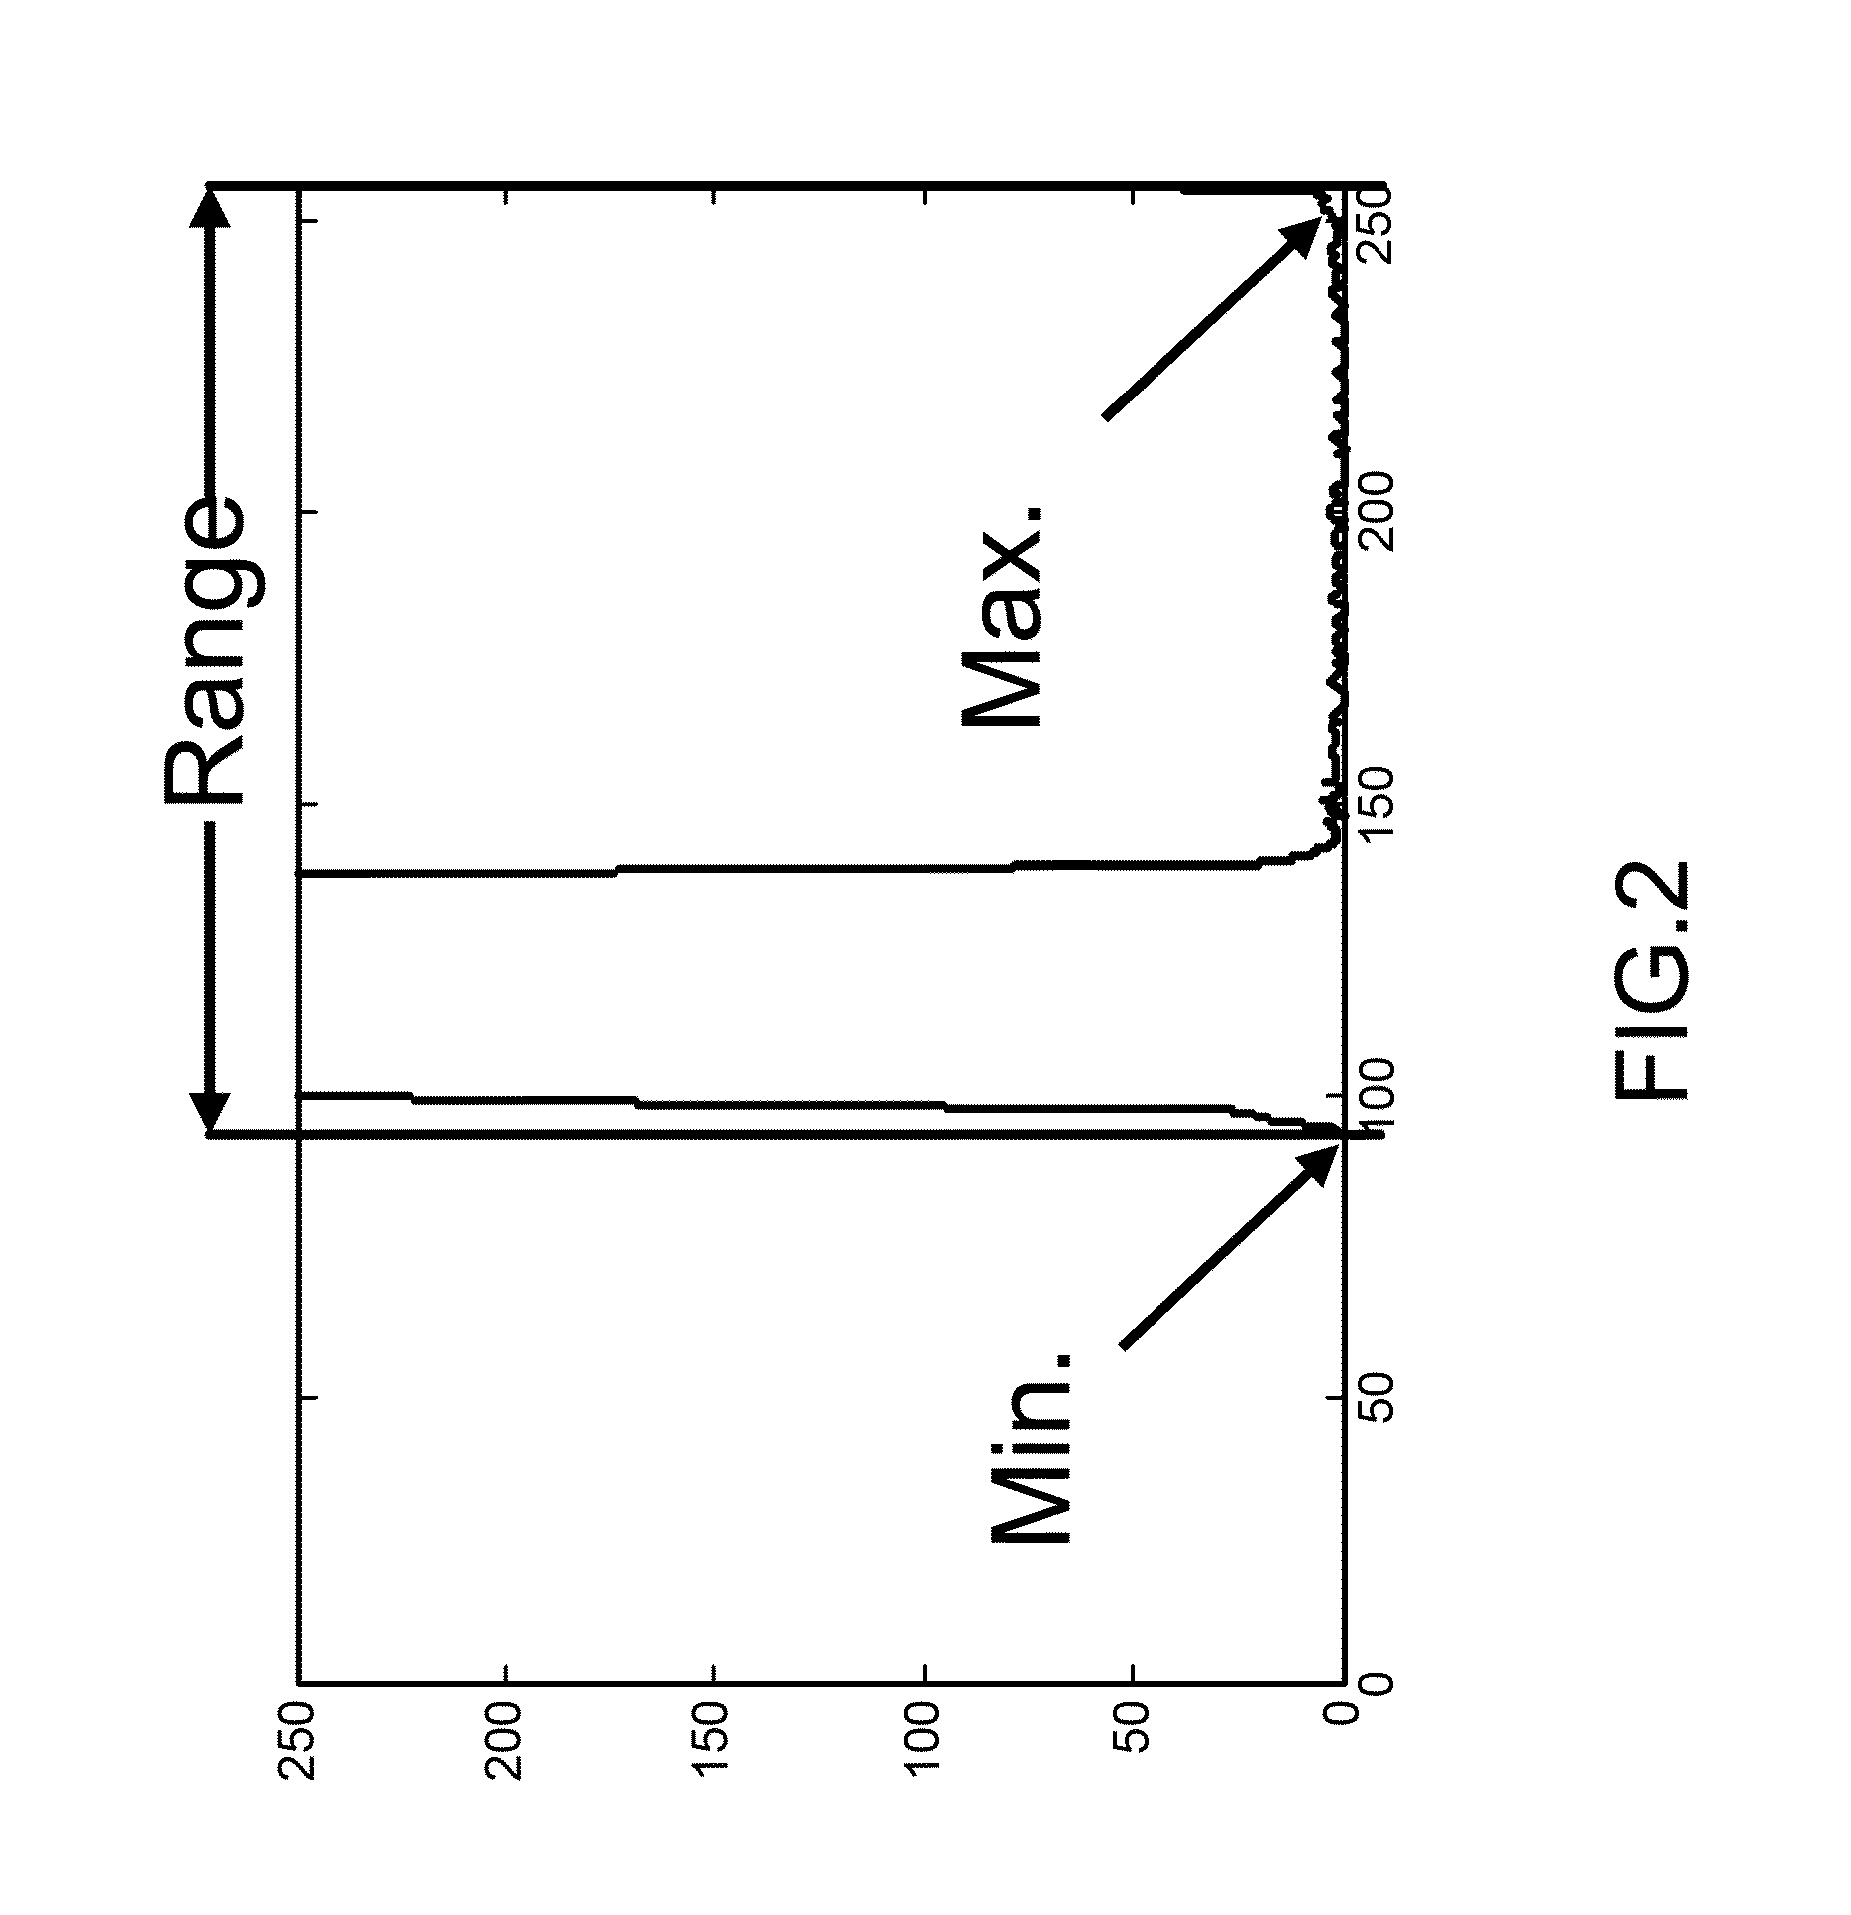 Method of Defect Image Classification through Integrating Image Analysis and Data Mining